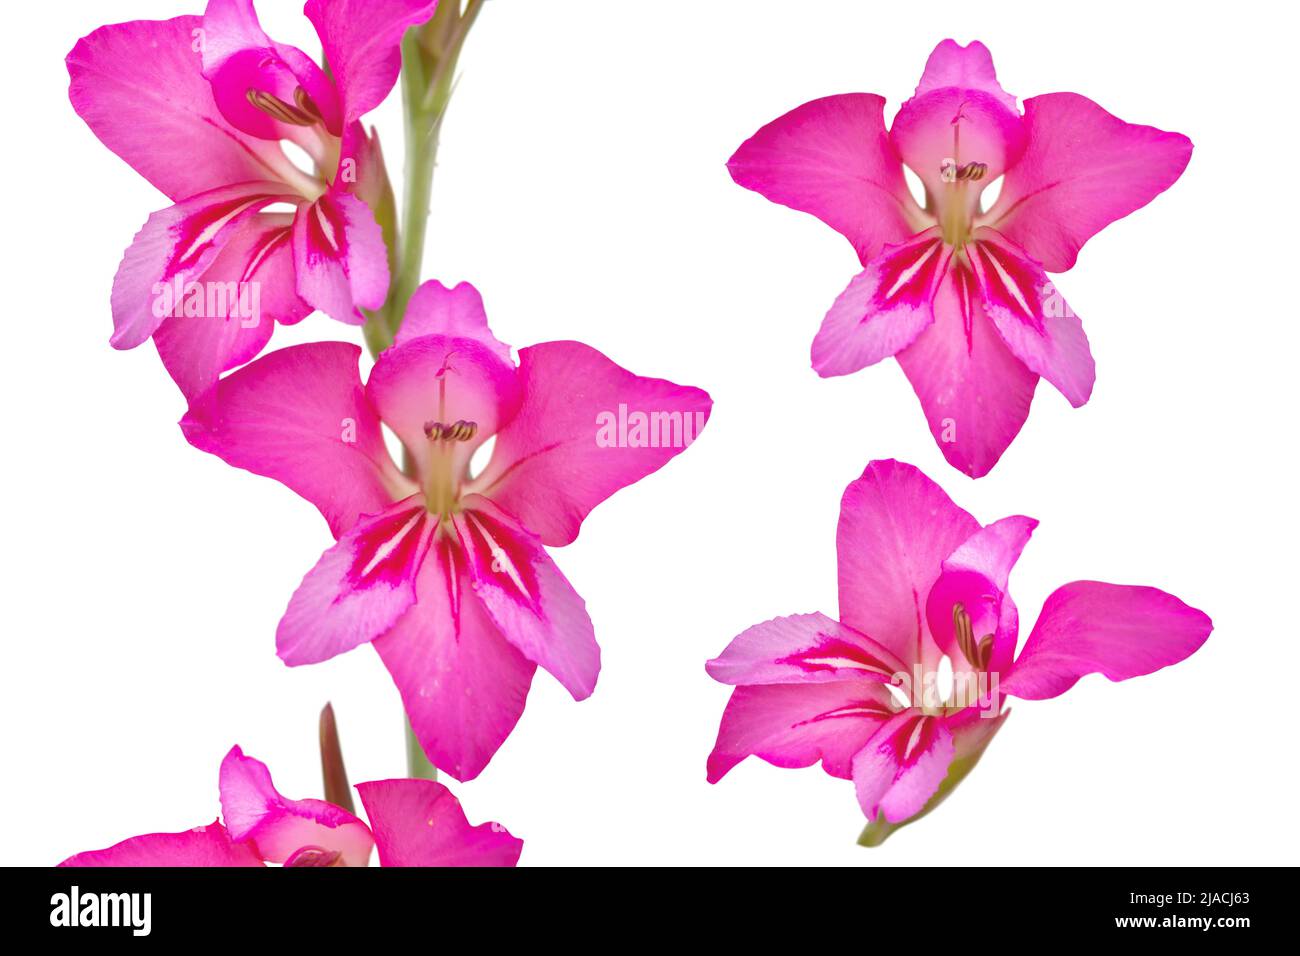 Gladiolus communis or eastern gladiolus or common corn-flag bright pink flowers isolated on white Stock Photo